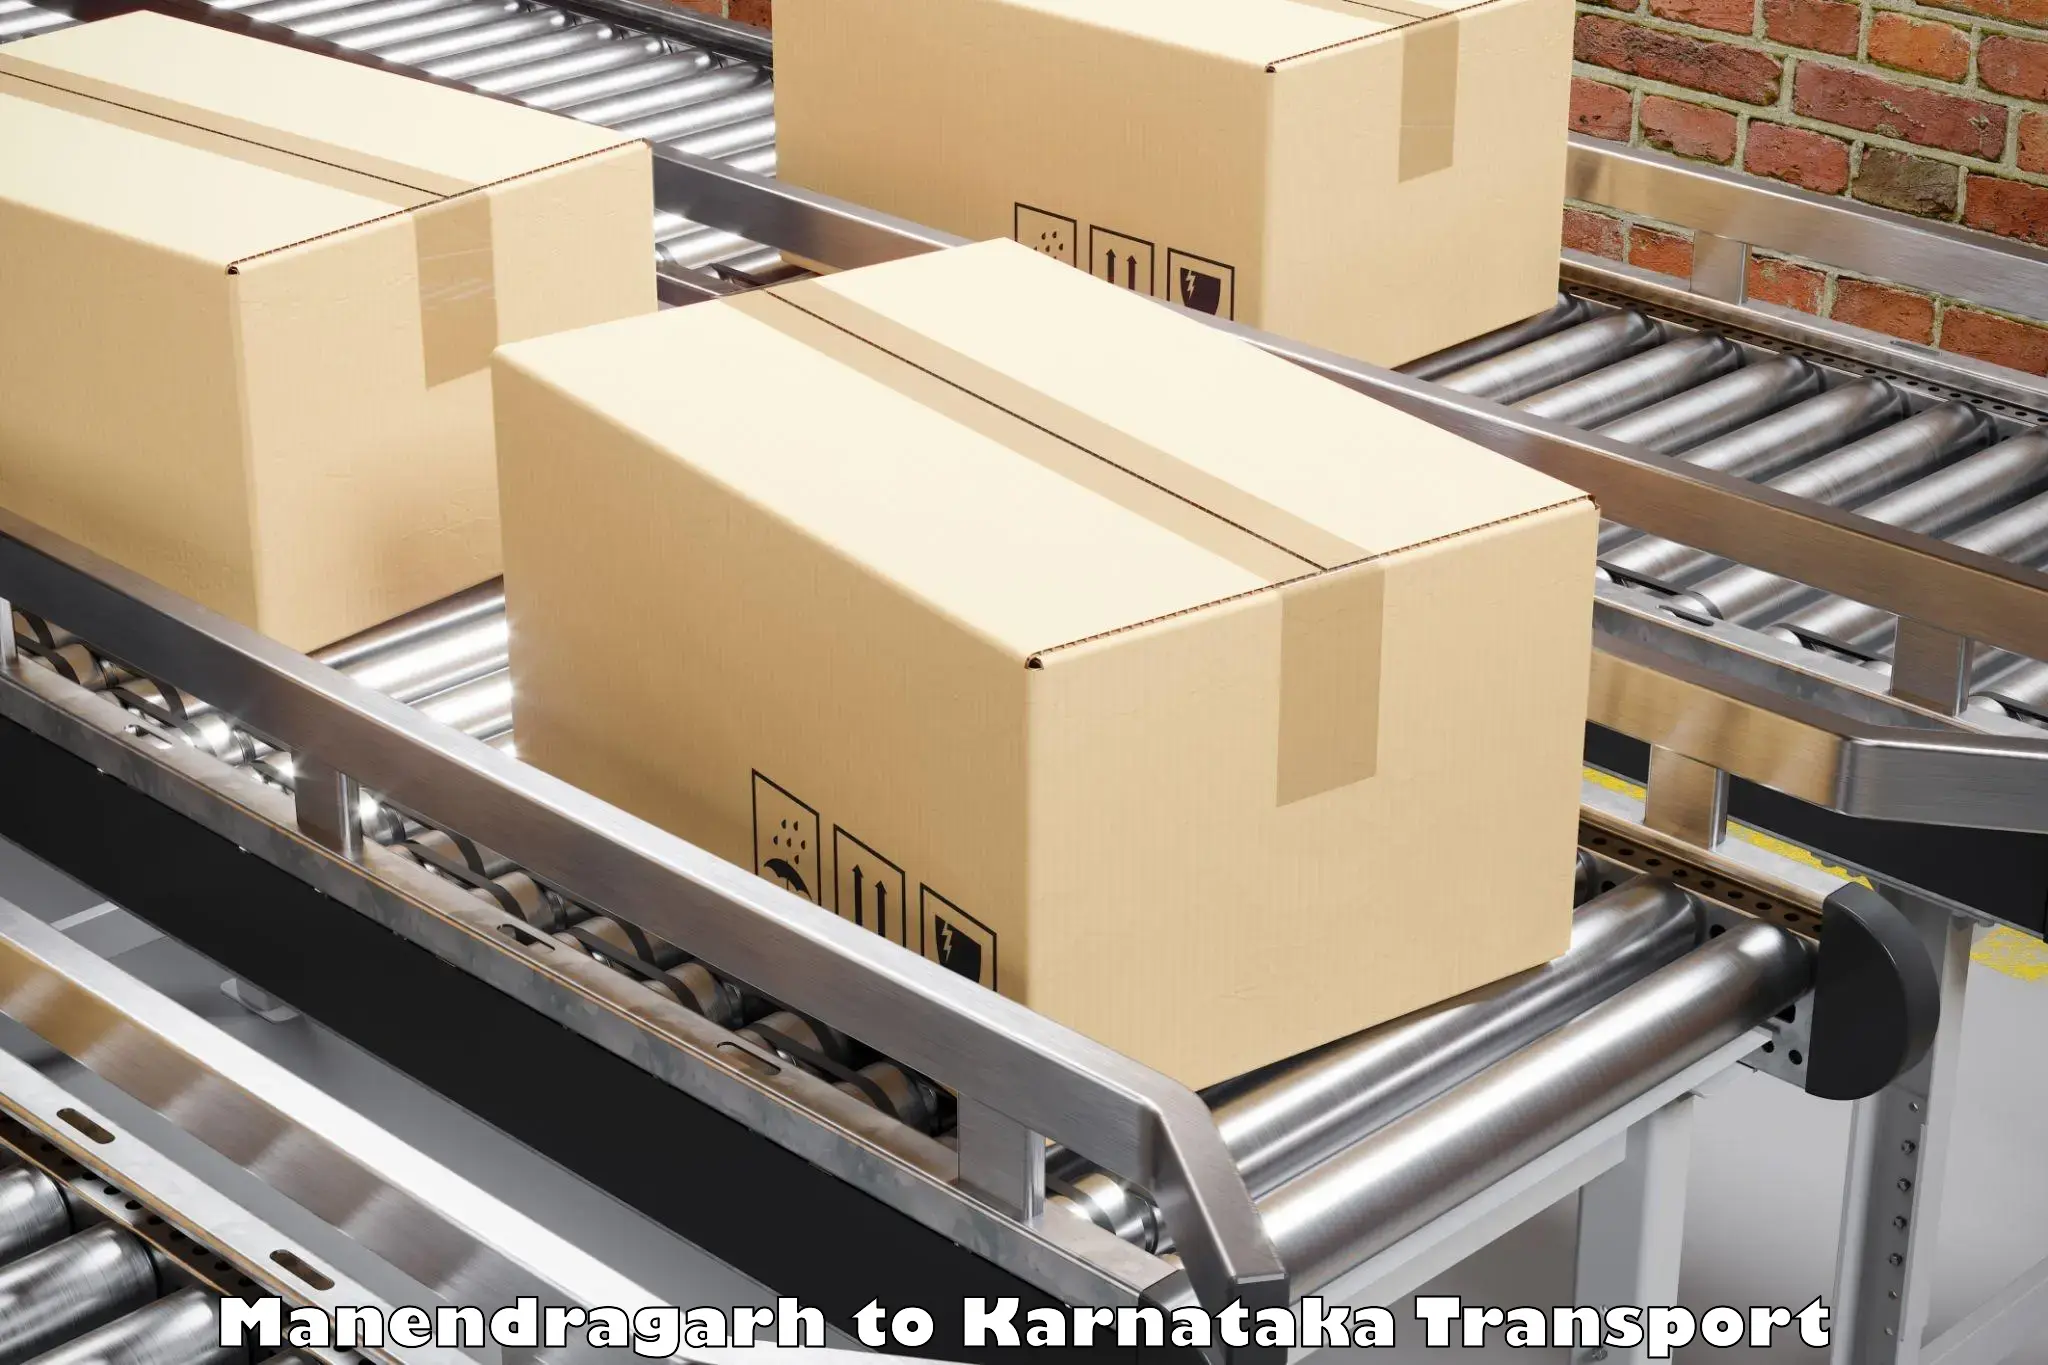 Air freight transport services Manendragarh to Hunsur